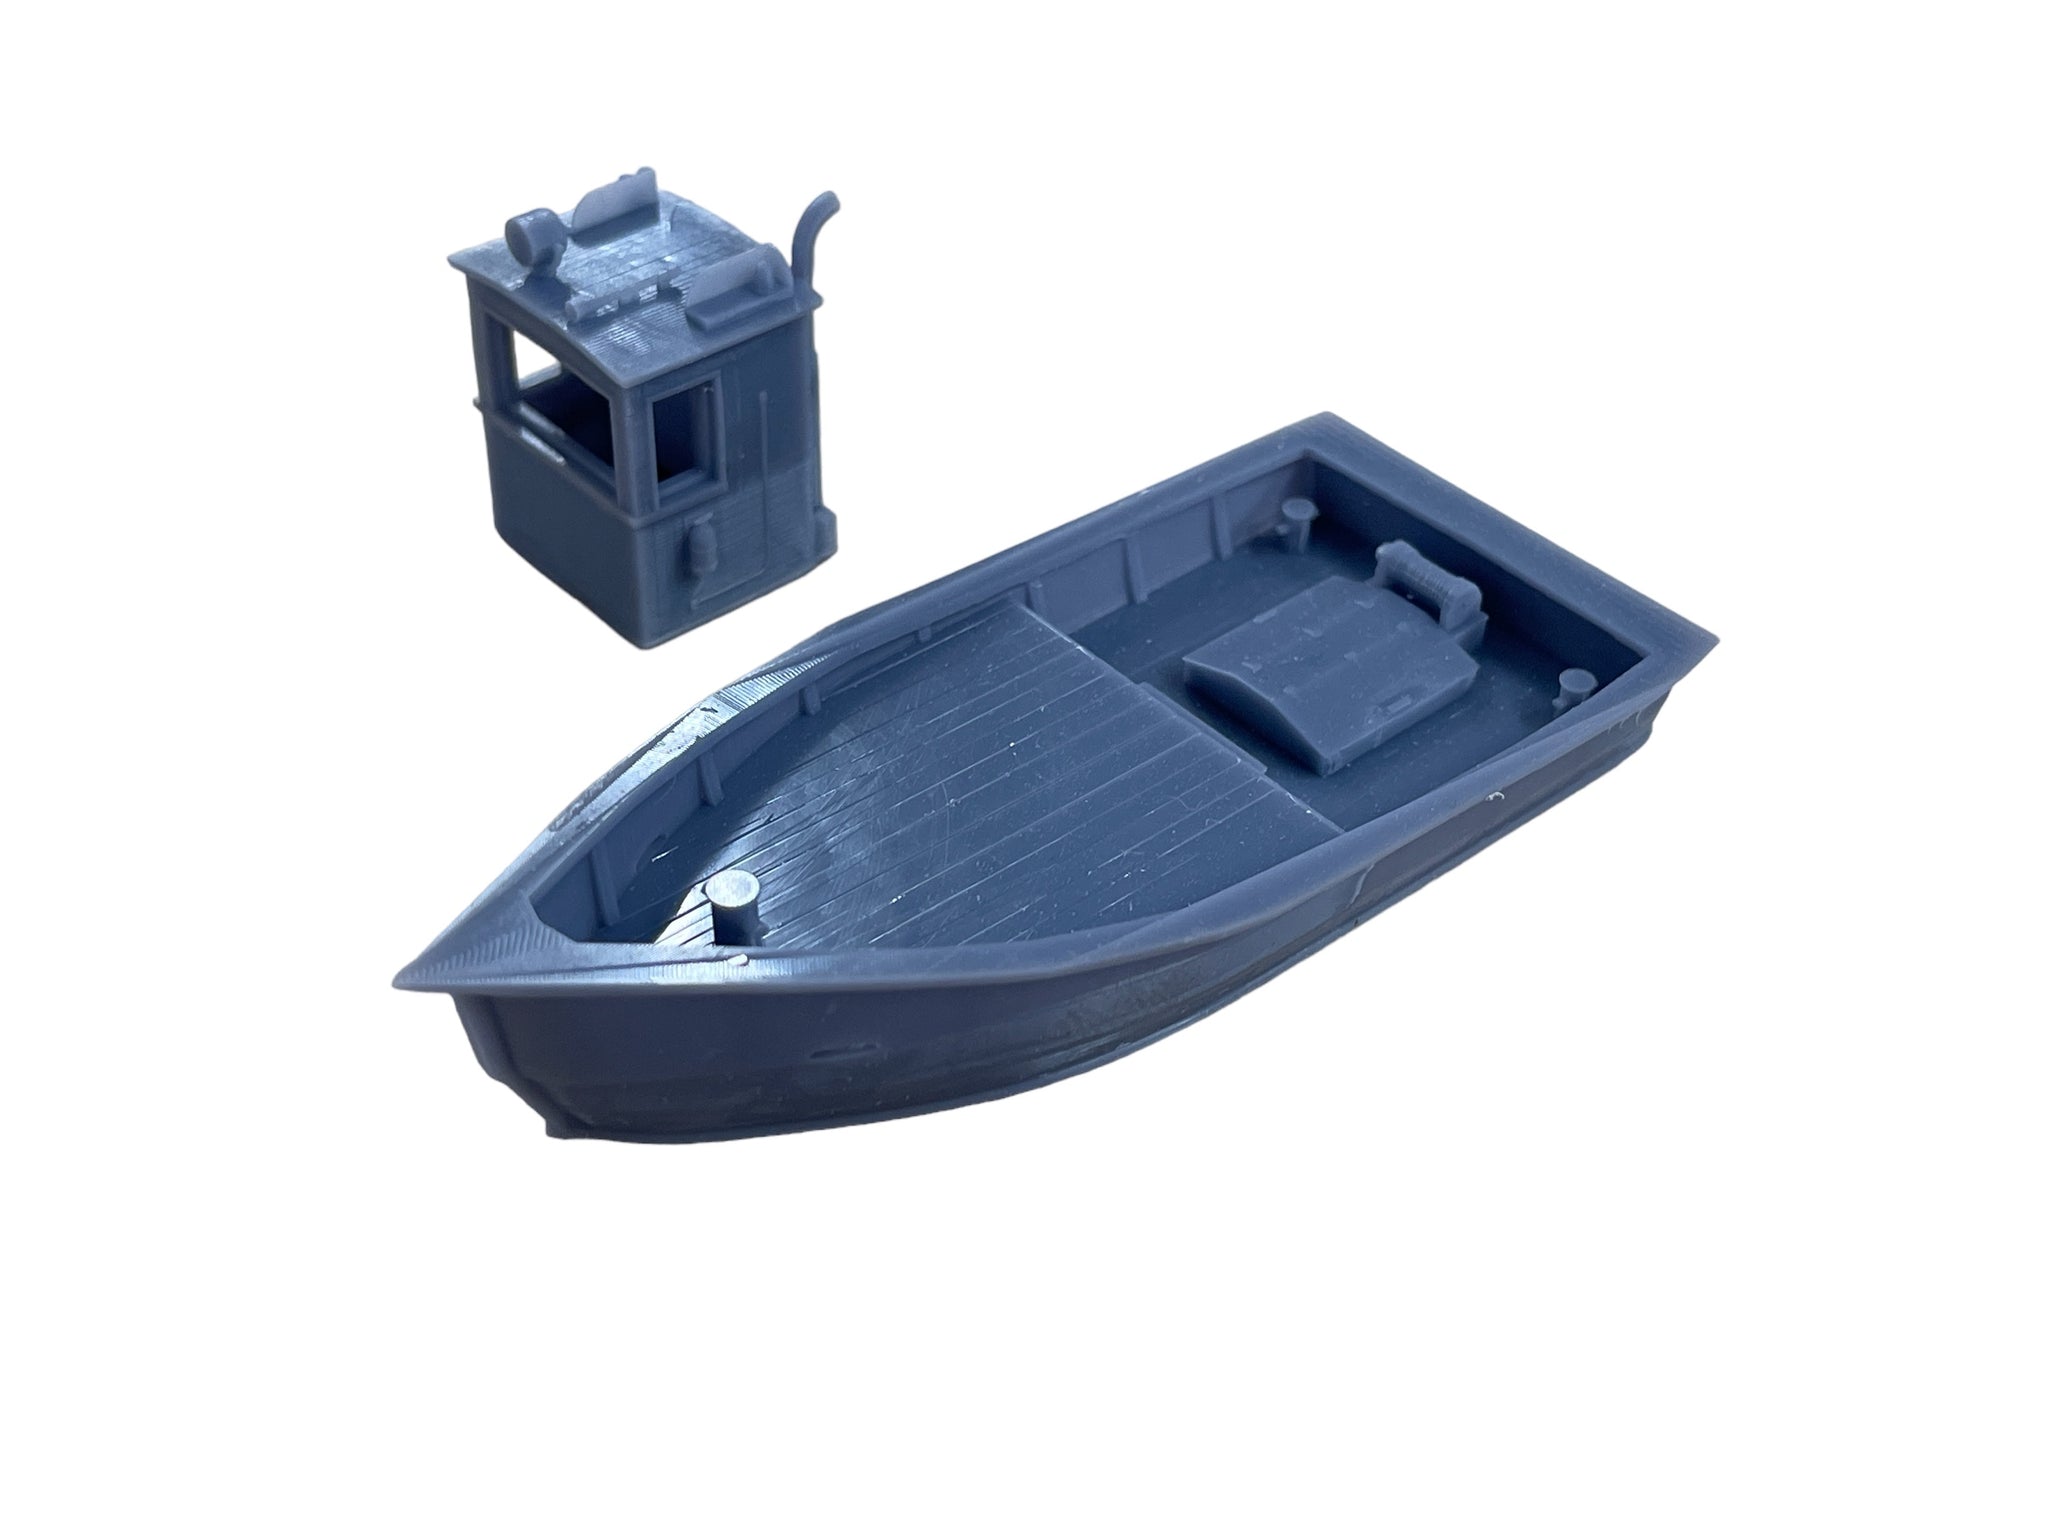 28' FISHING BOAT - HO Scale Kit – Fos Scale Models